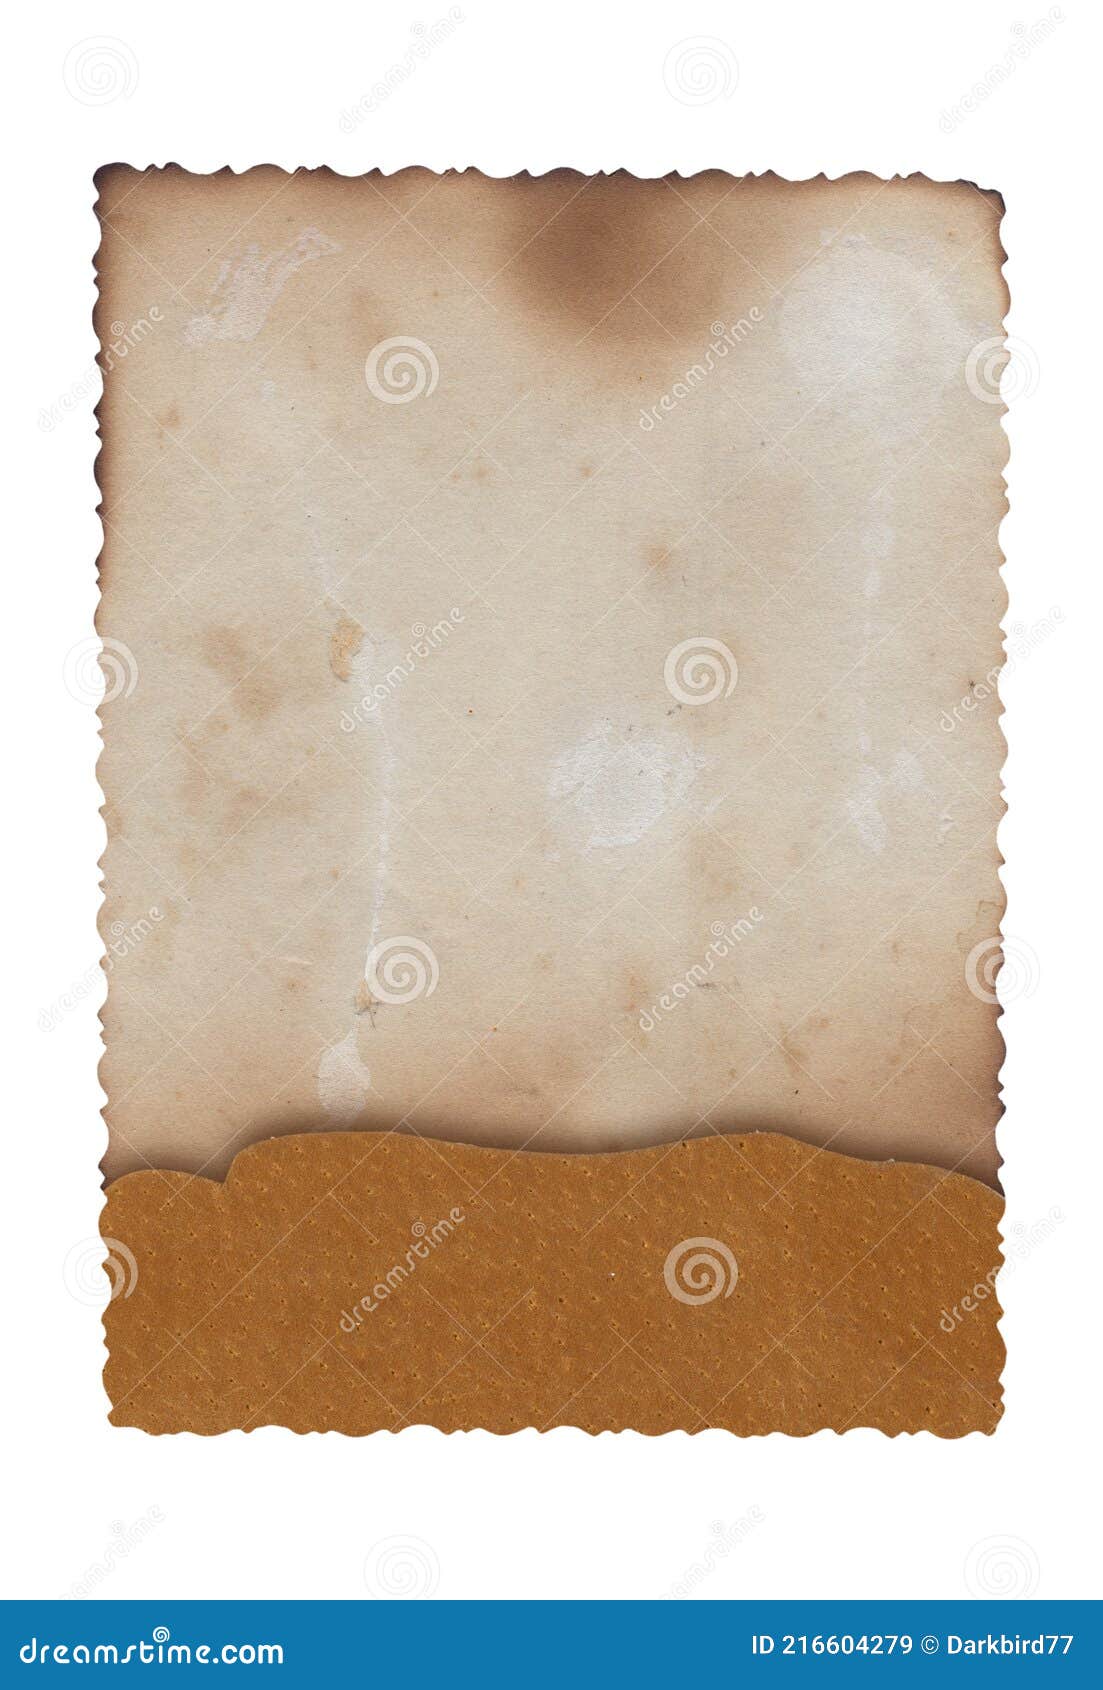 Old Vintage Paper Background with Natural Leather Texture Stock Image ...